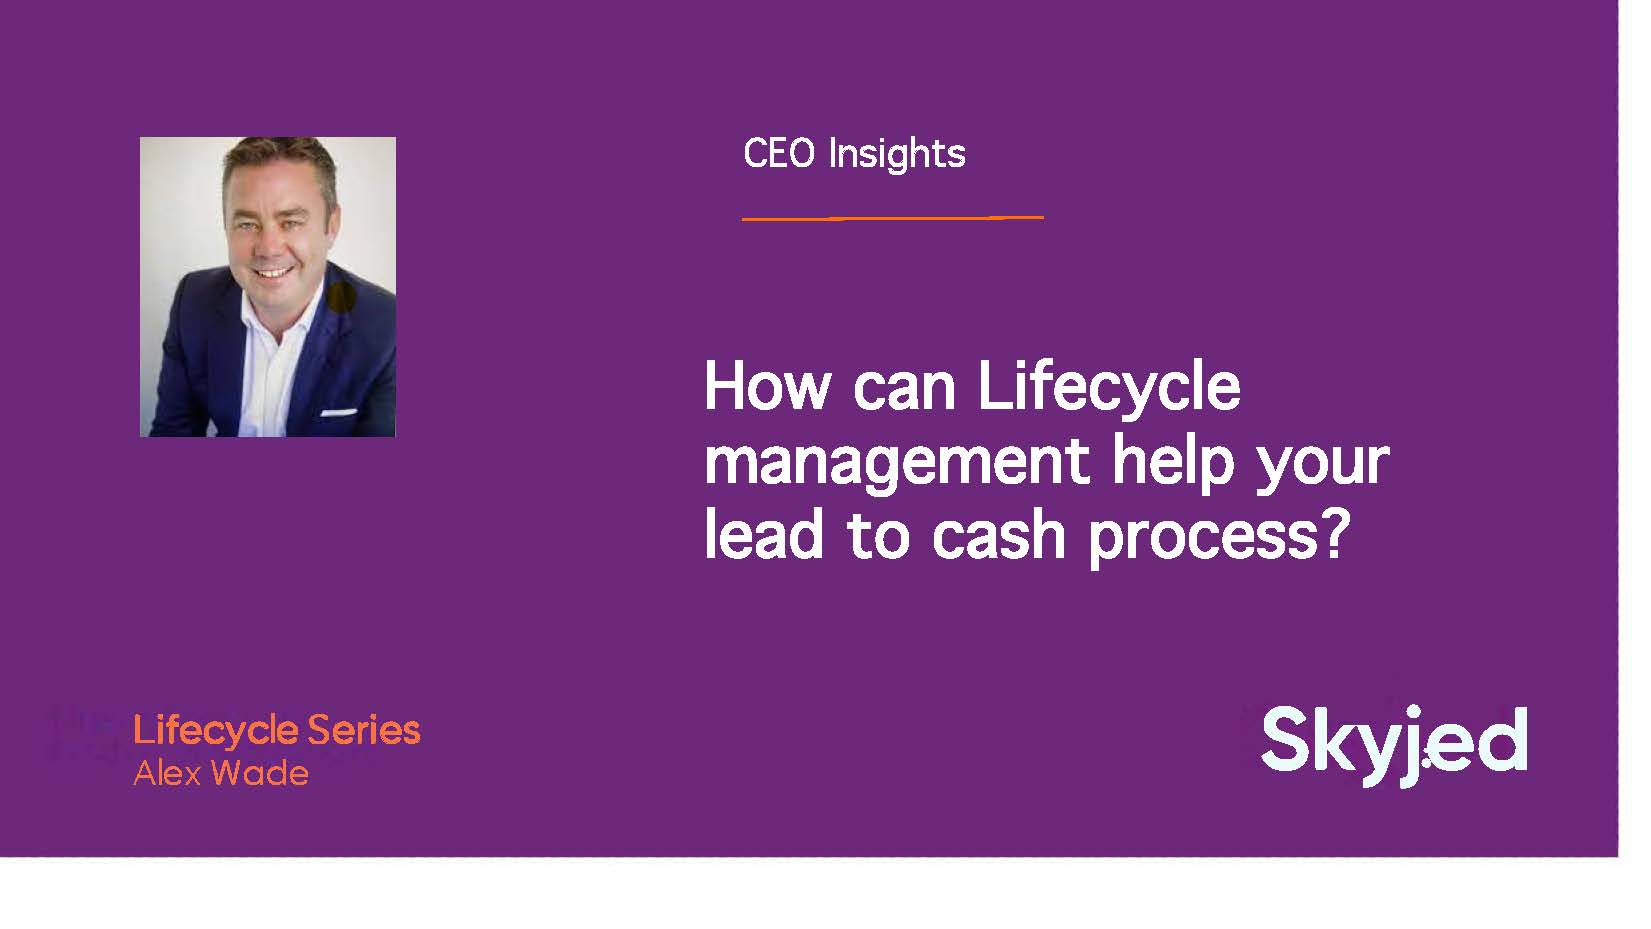 How can lifecycle management help the lead to cash process